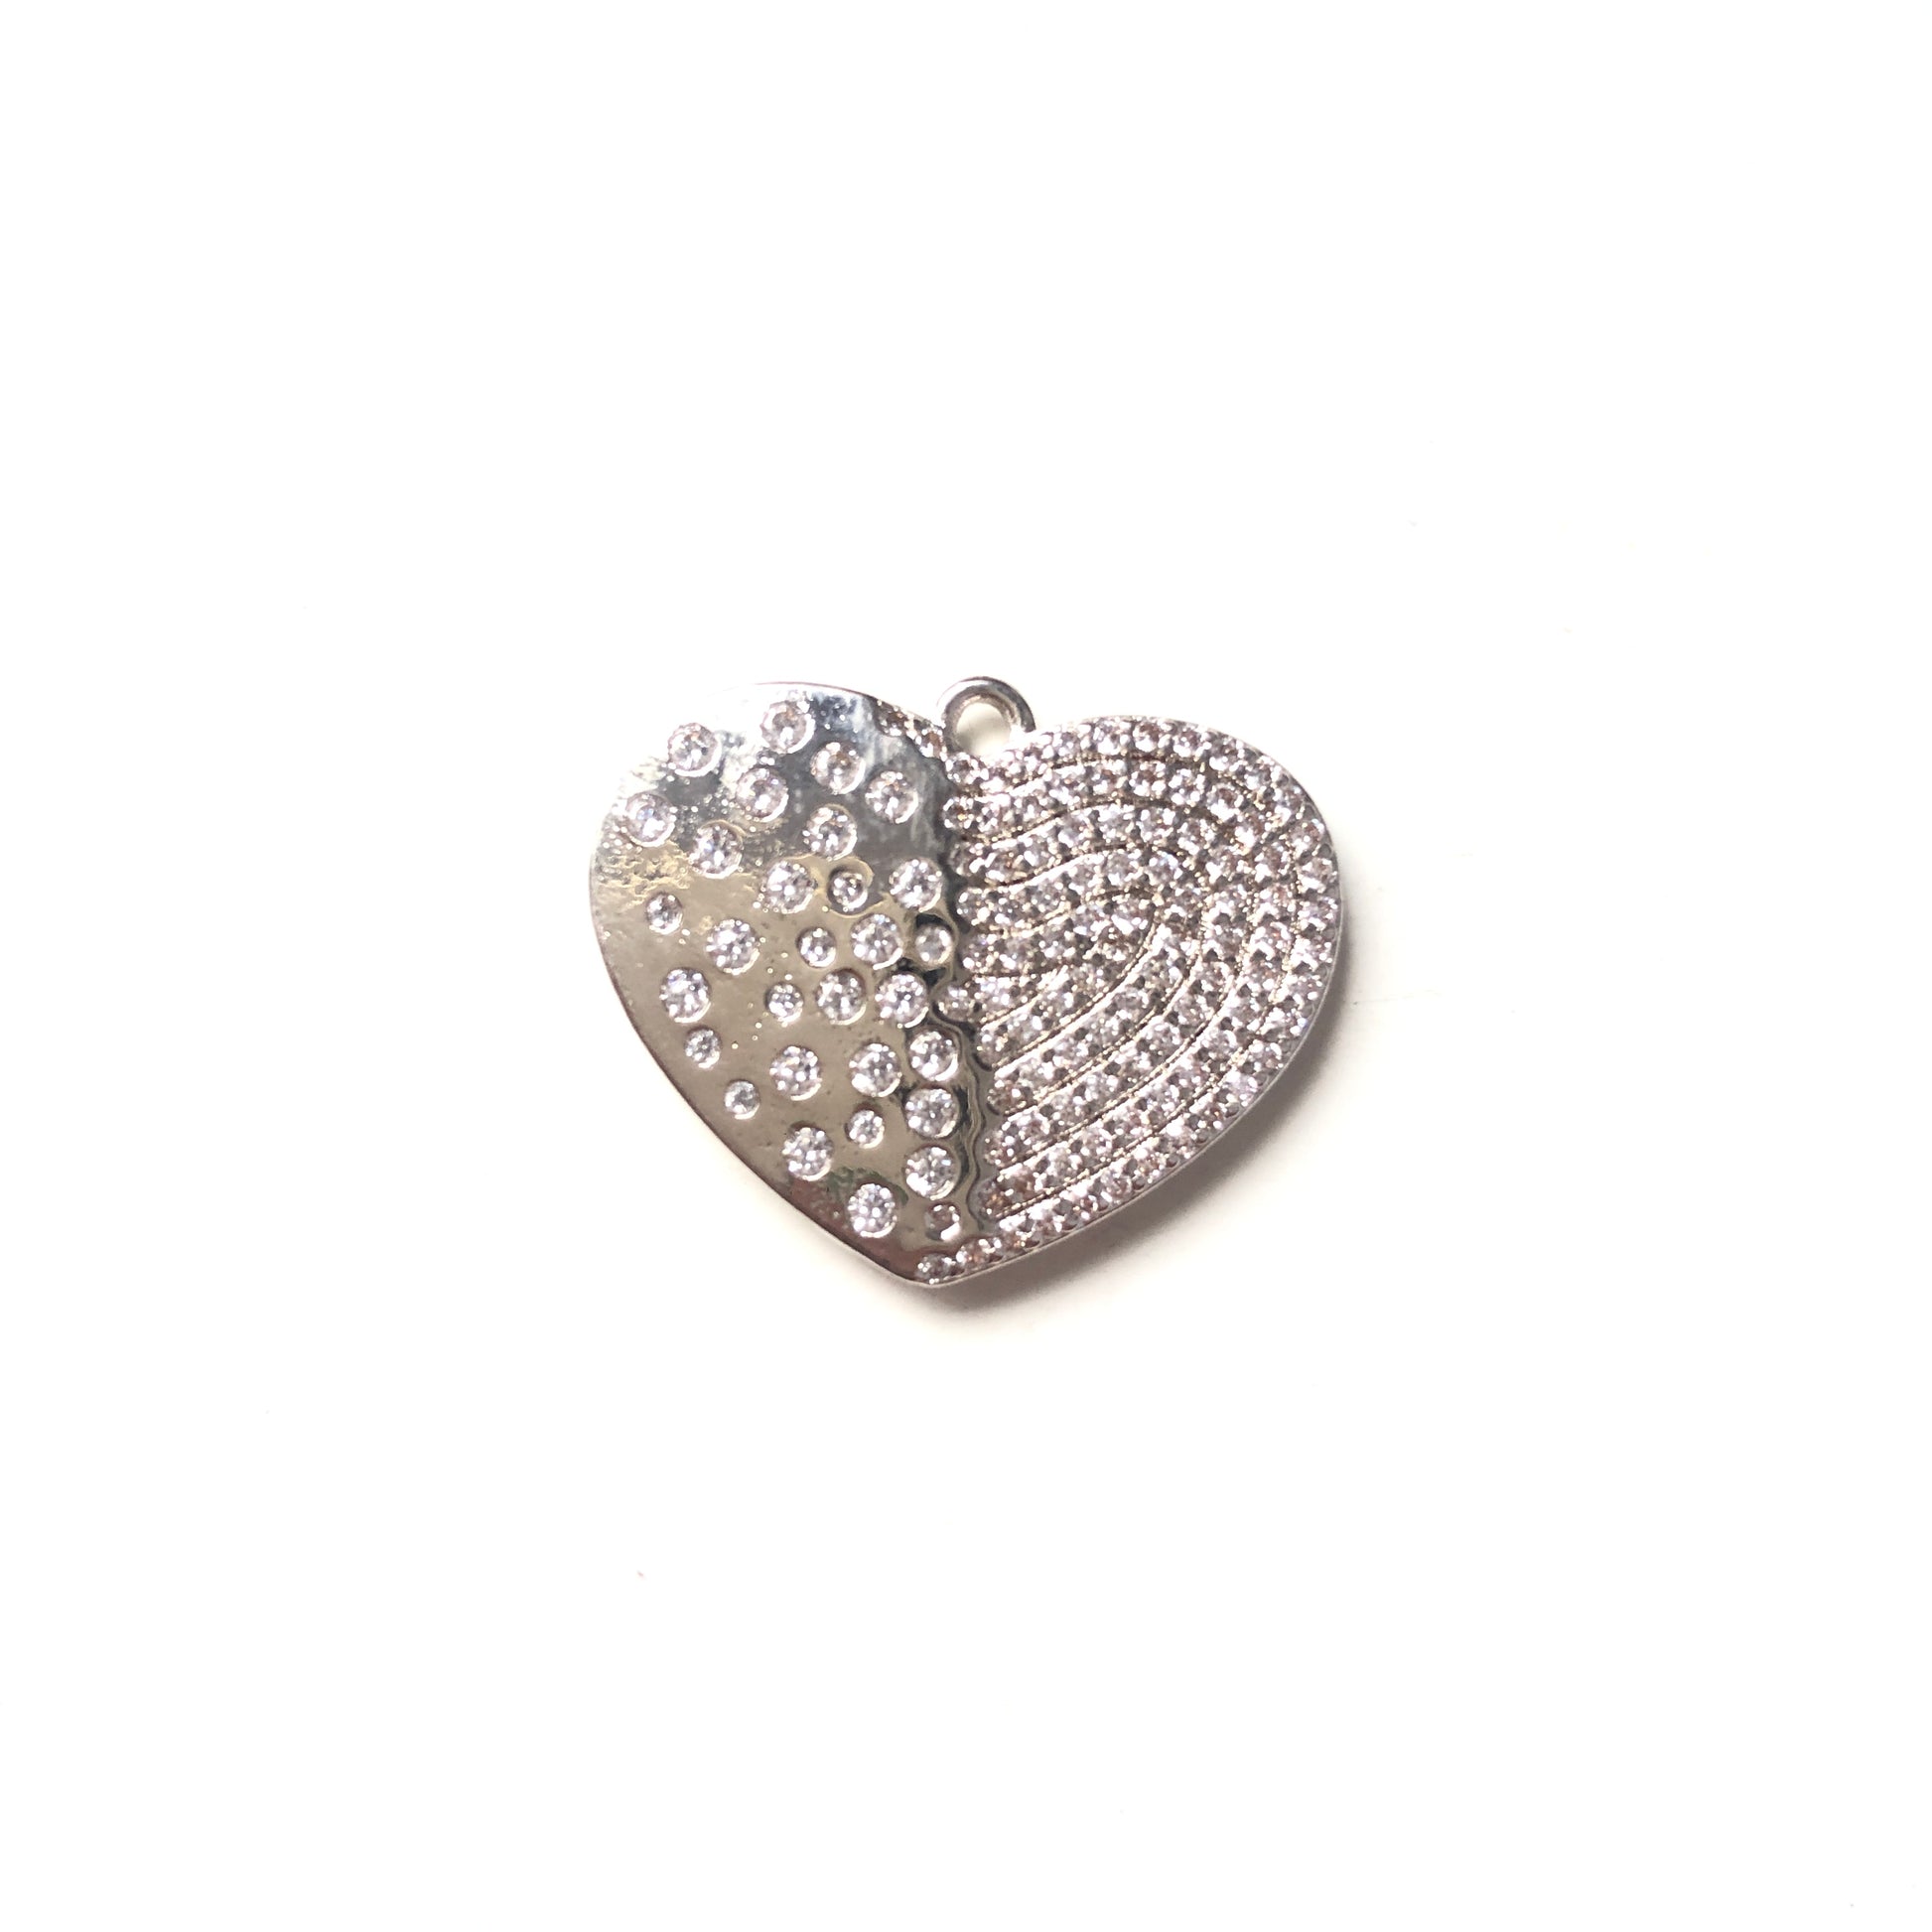 10pcs/lot 20*24.5mm CZ Paved Heart Charms Clear on Silver CZ Paved Charms Colorful Zirconia Hearts Charms Beads Beyond